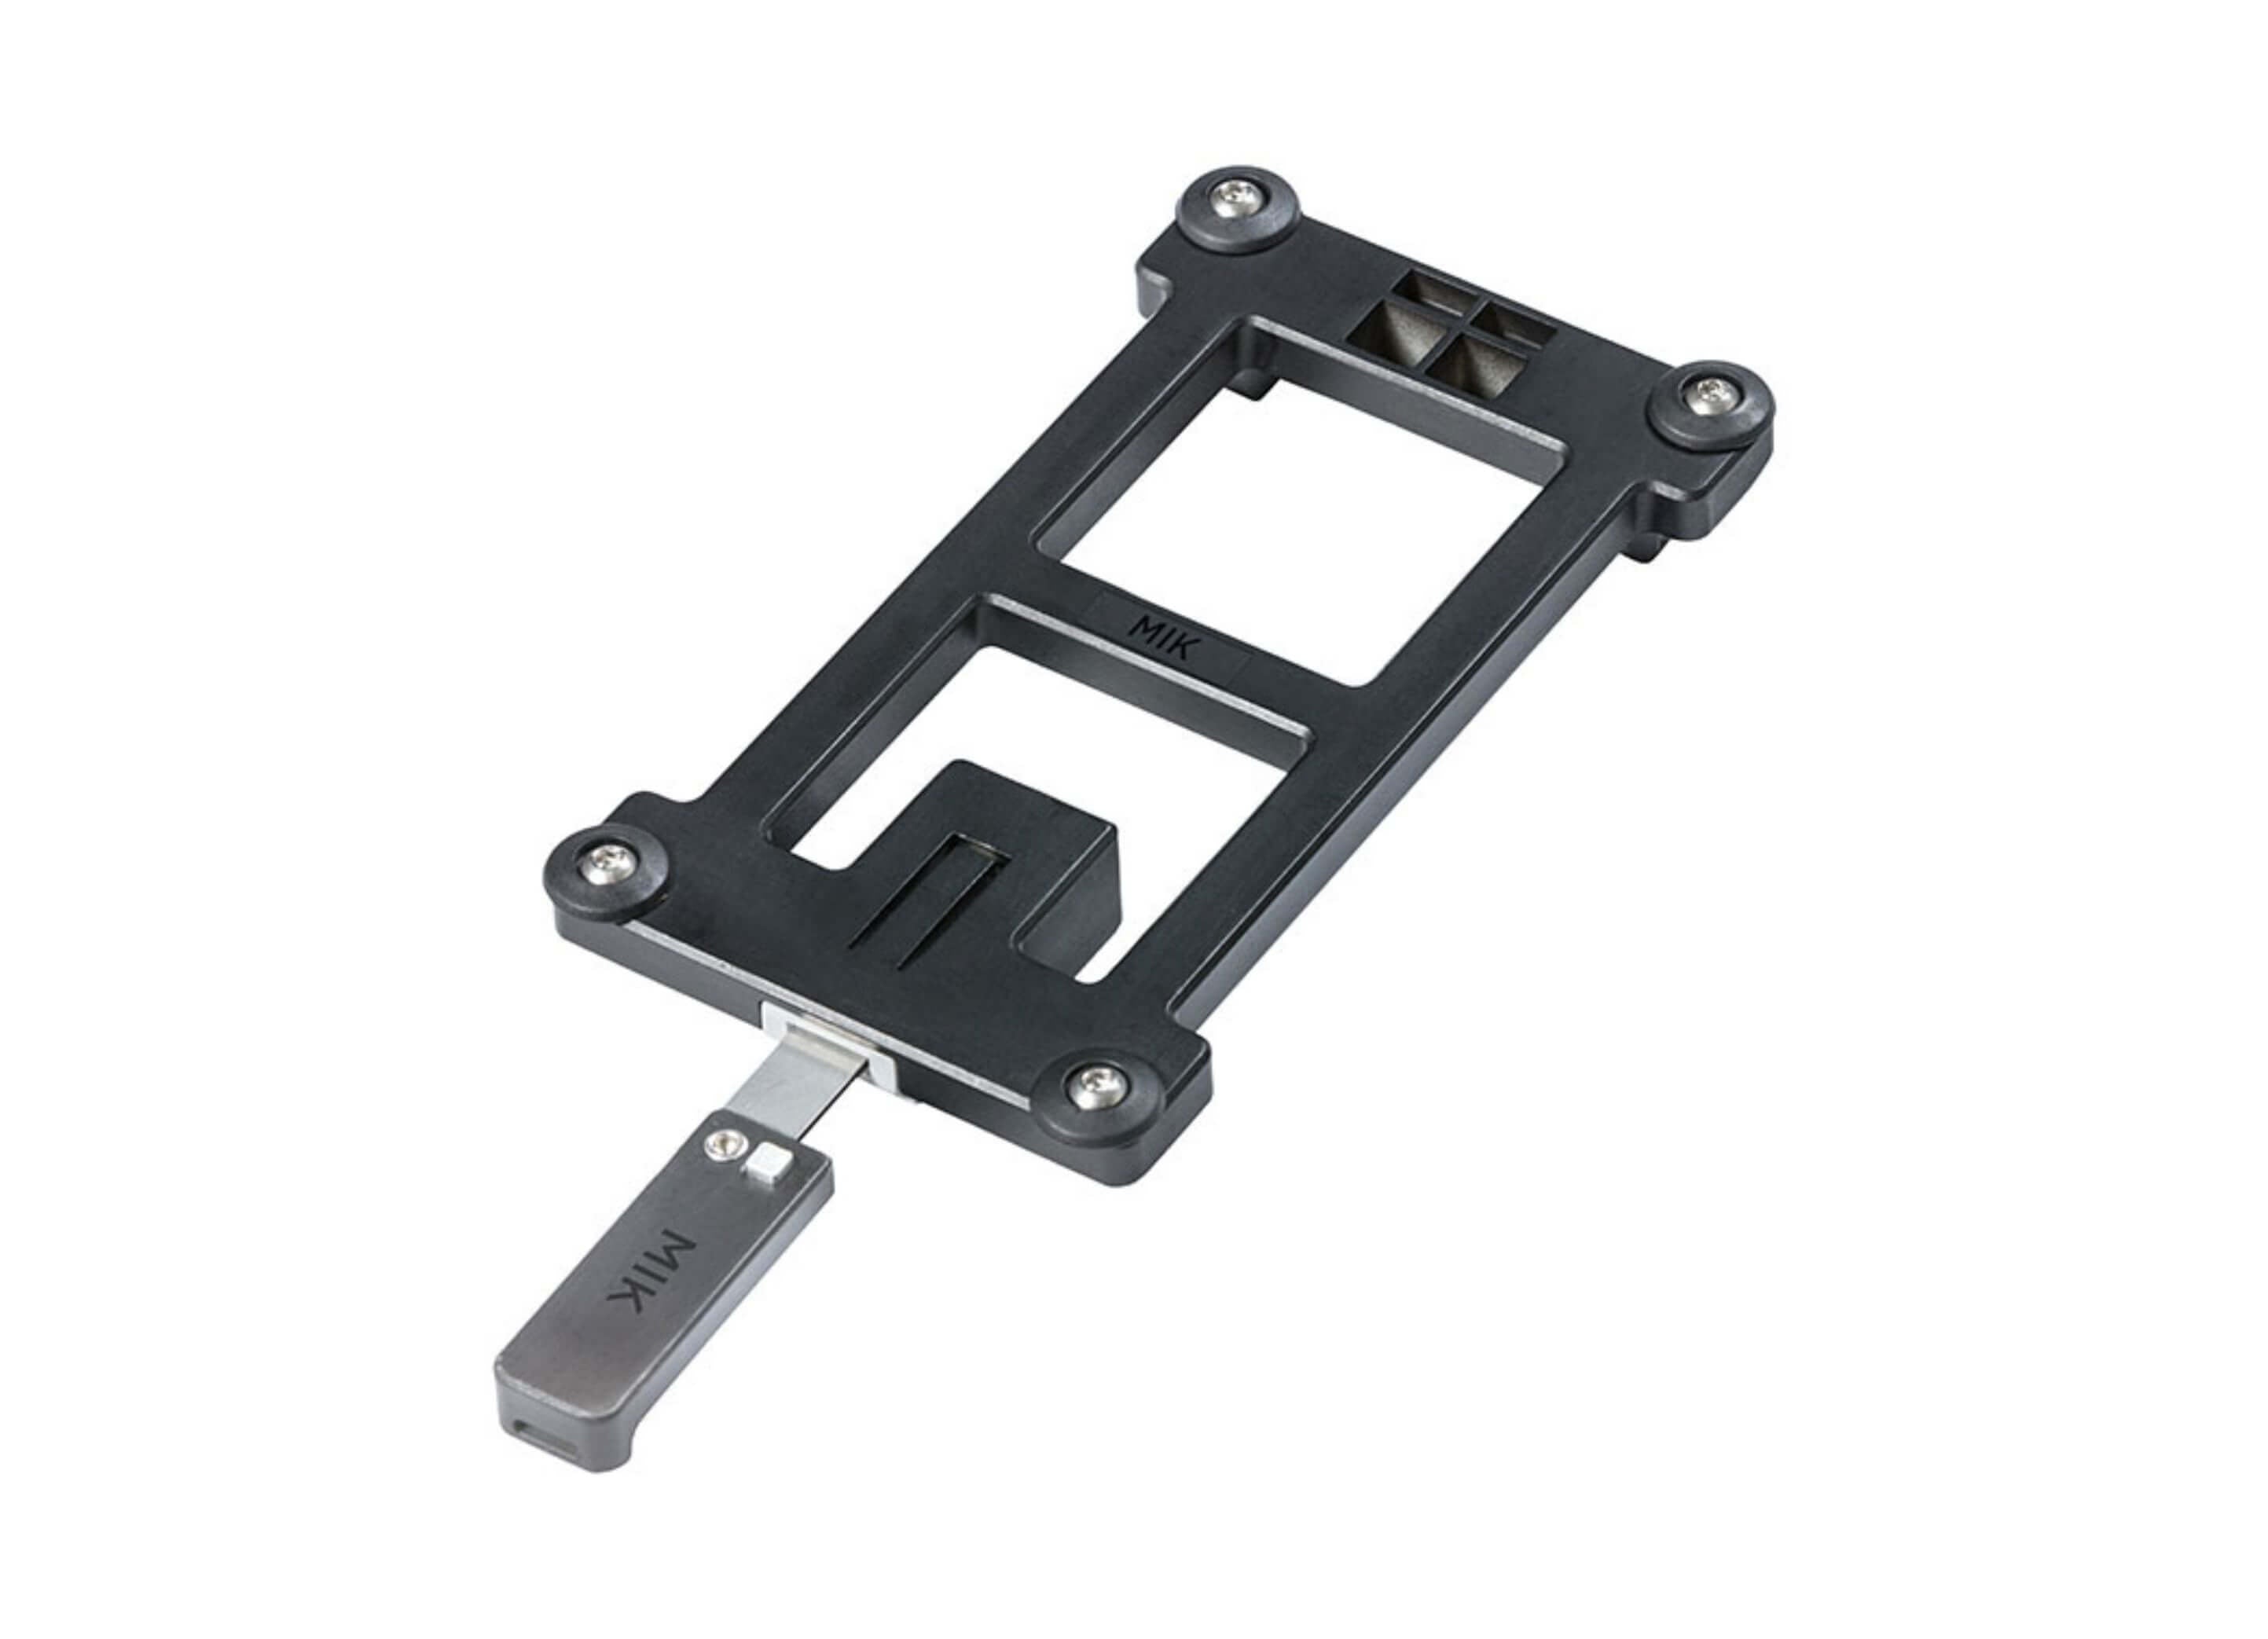 MIK Accessory Adapter Plate